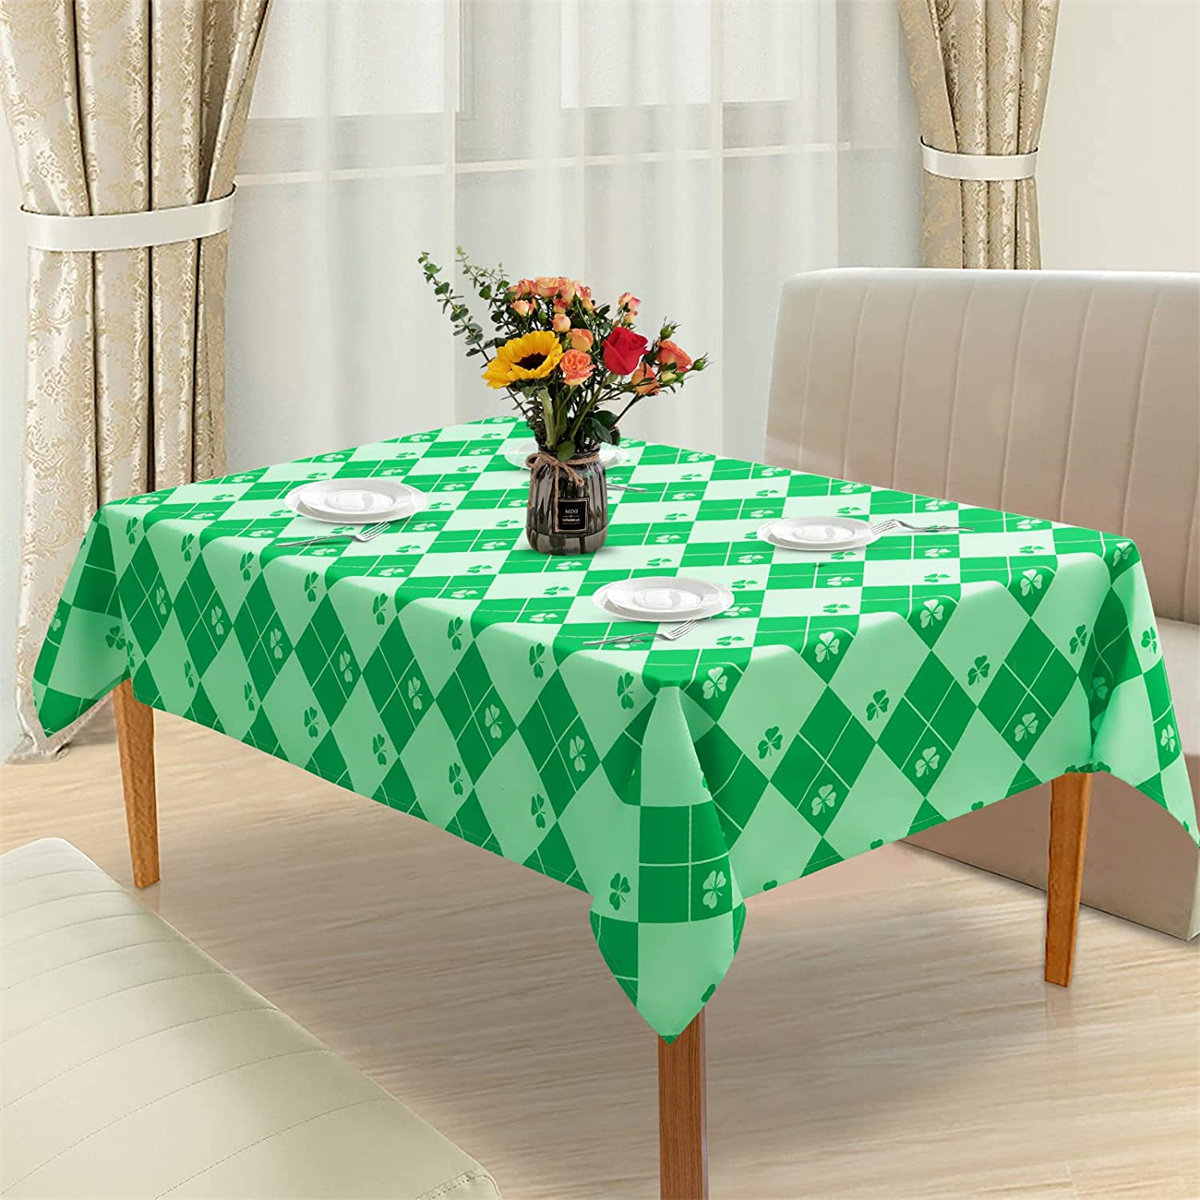 Available in a range of sizes Forest Green Rectangular Tablecloths 